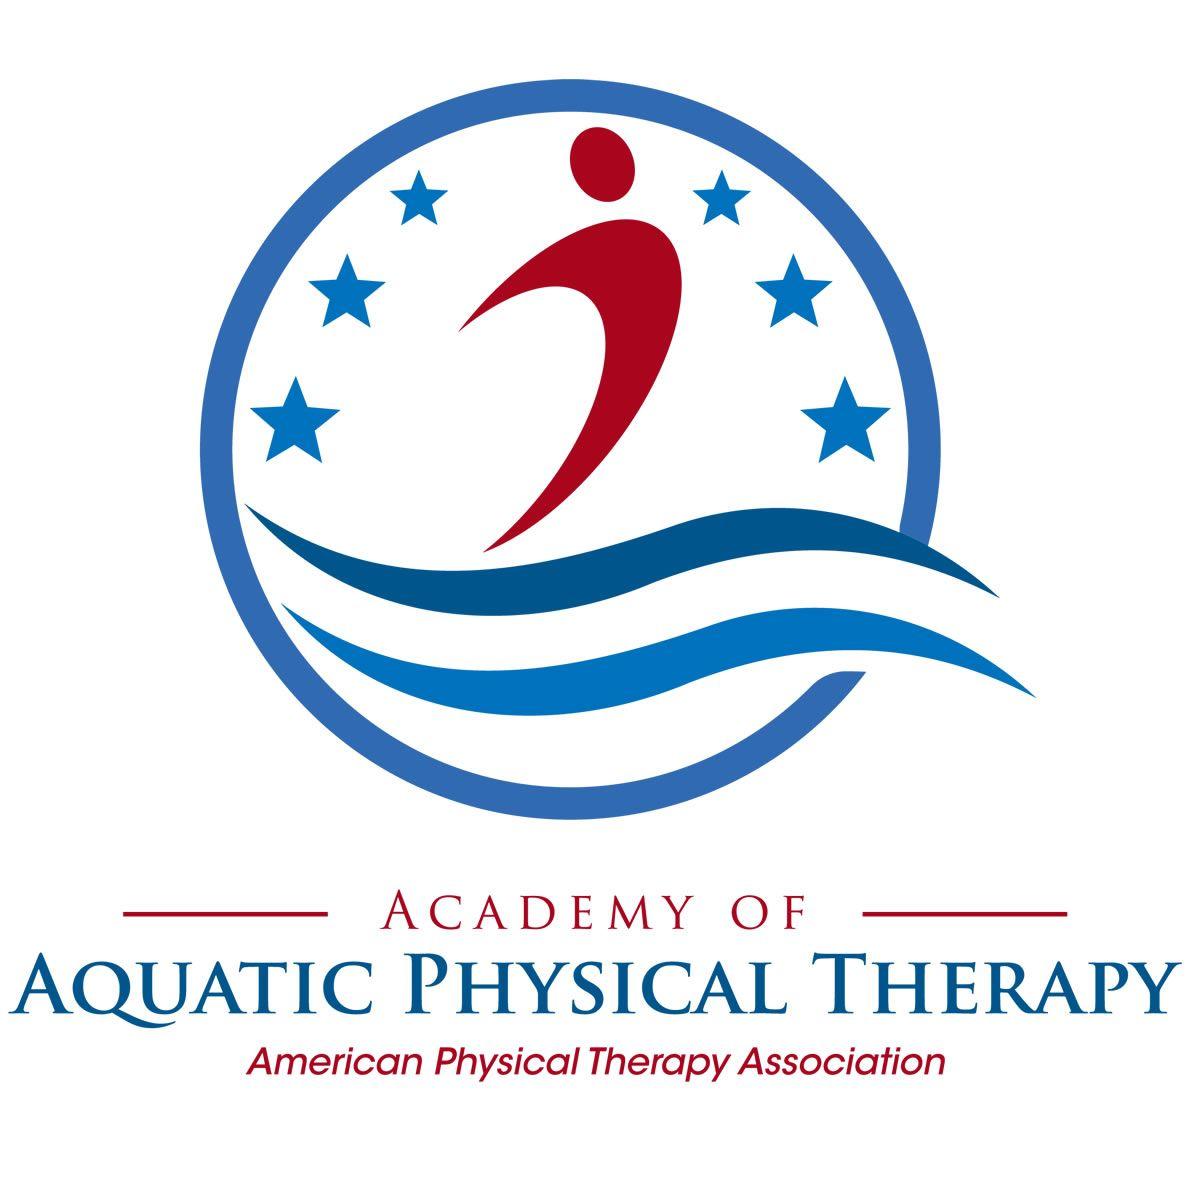 American Physical Therapy Association Logo - Academy of Aquatic Physical Therapy | AquaticPT